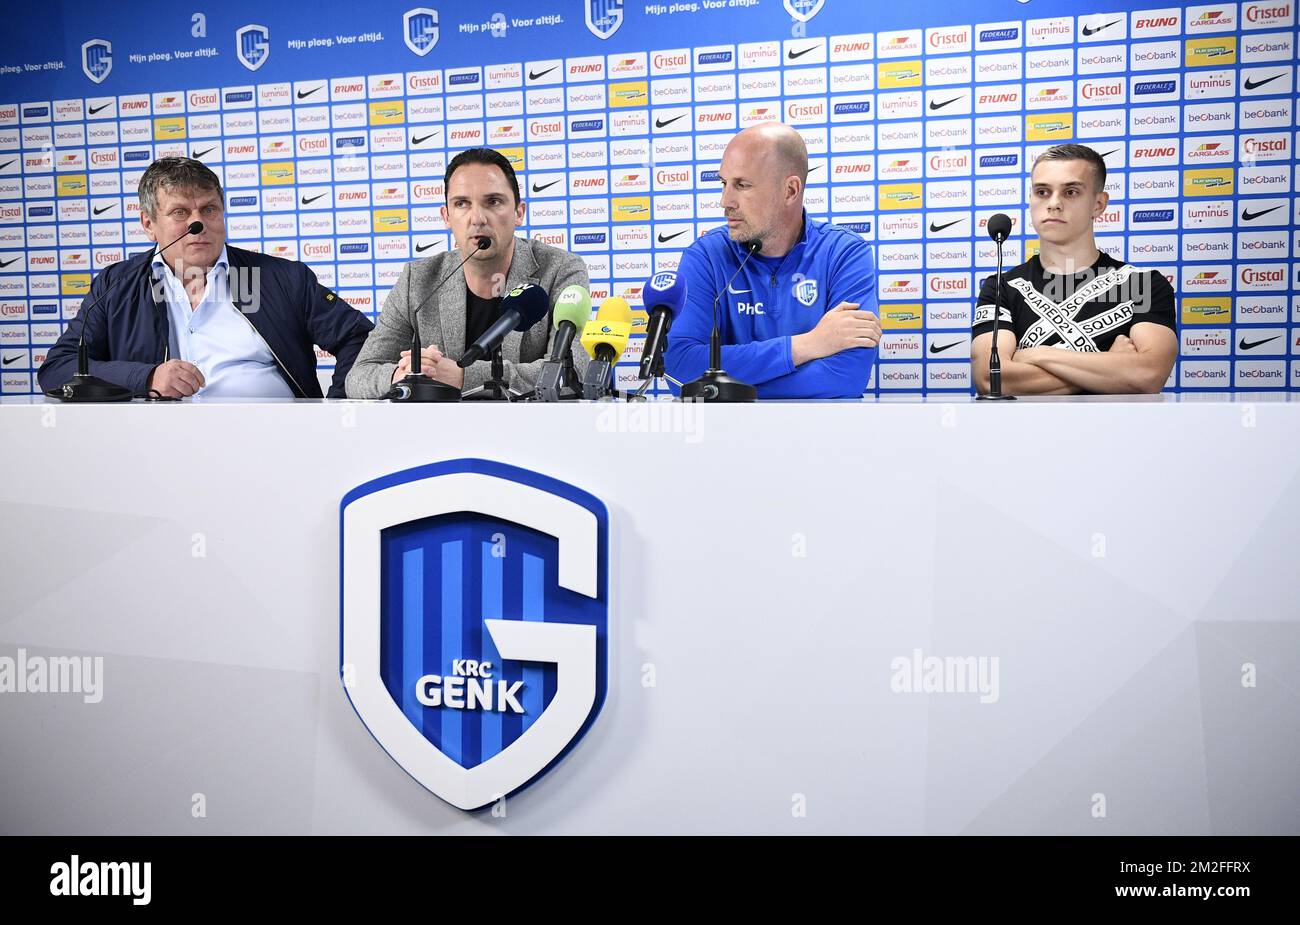 Trossard's manager Josy Comhair, Genk's technical director Dimitri De Conde, Genk's head coach Philippe Clement and Genk's Leandro Trossard pictured during a press conference of Belgian first league soccer team KRC Genk, Thursday 24 May 2018 in Genk. BELGA PHOTO YORICK JANSENS Stock Photo